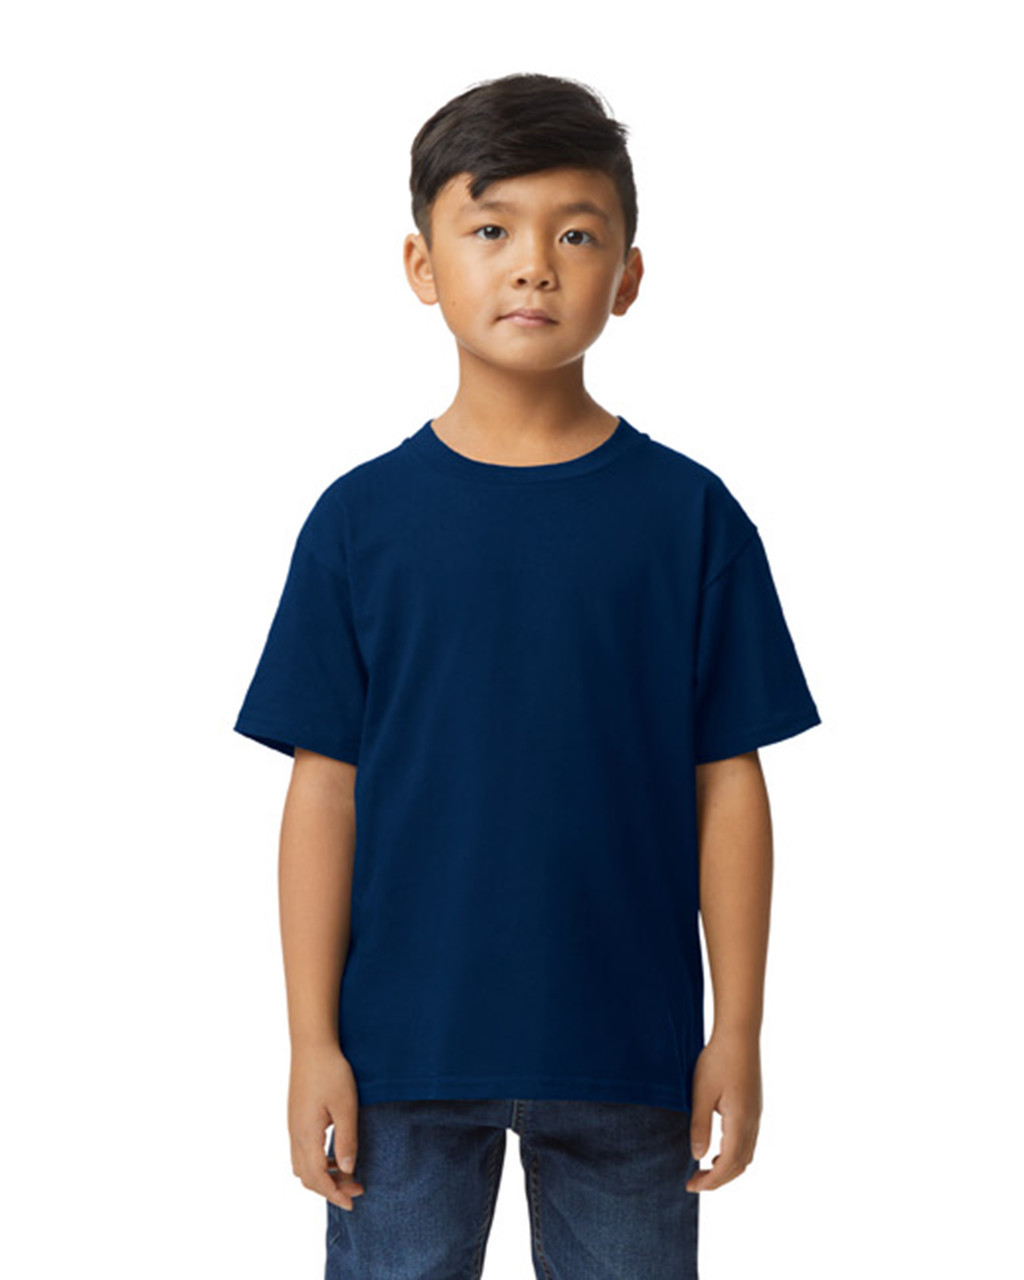 https://clothingdirect.co.nz/img/colors/gildan-65000b-softstyle-youth-midweight-tee-navy.jpg